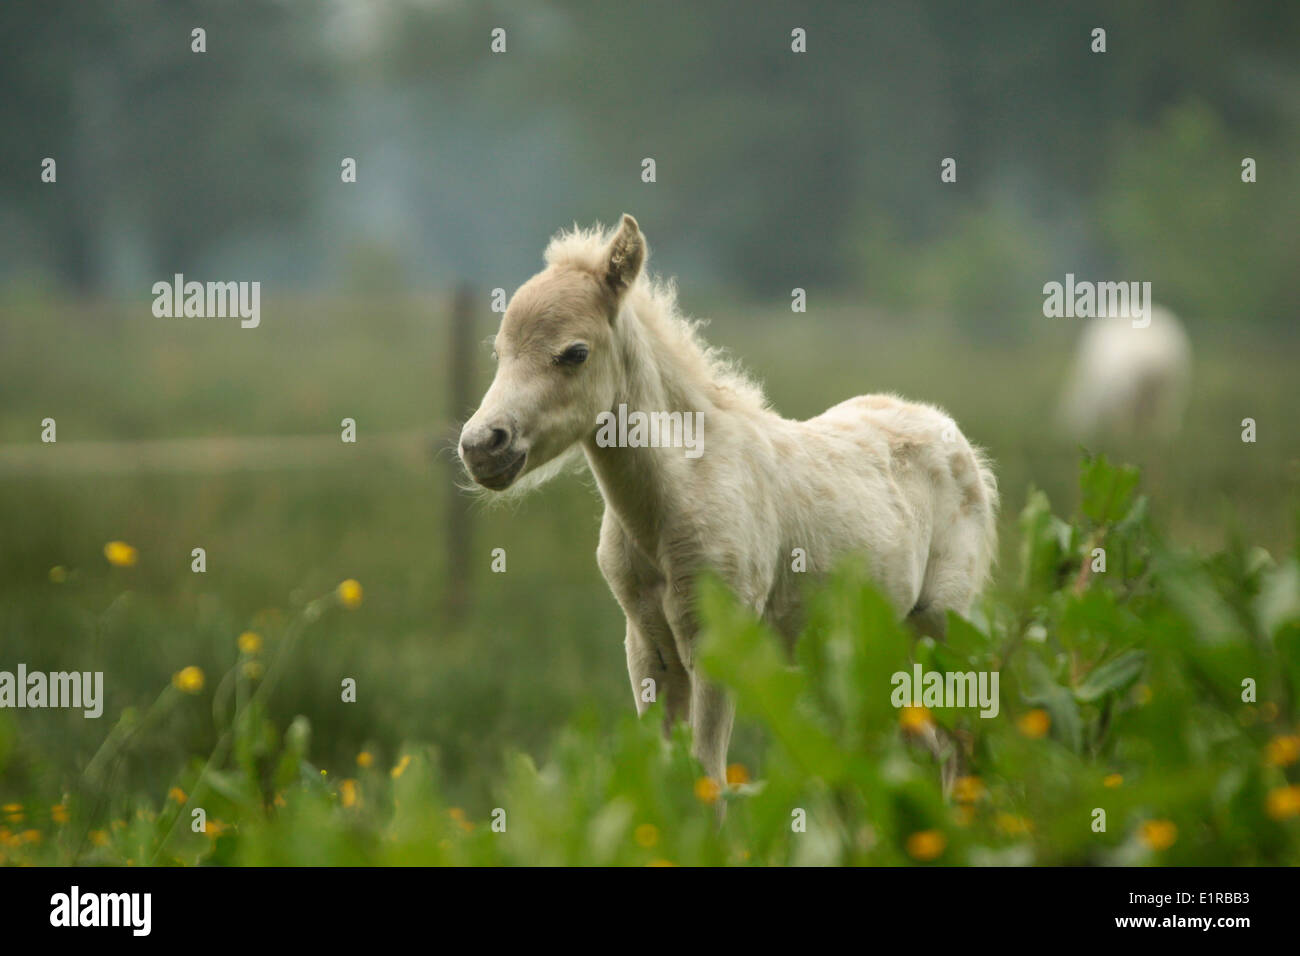 A foal is used as grazer Stock Photo